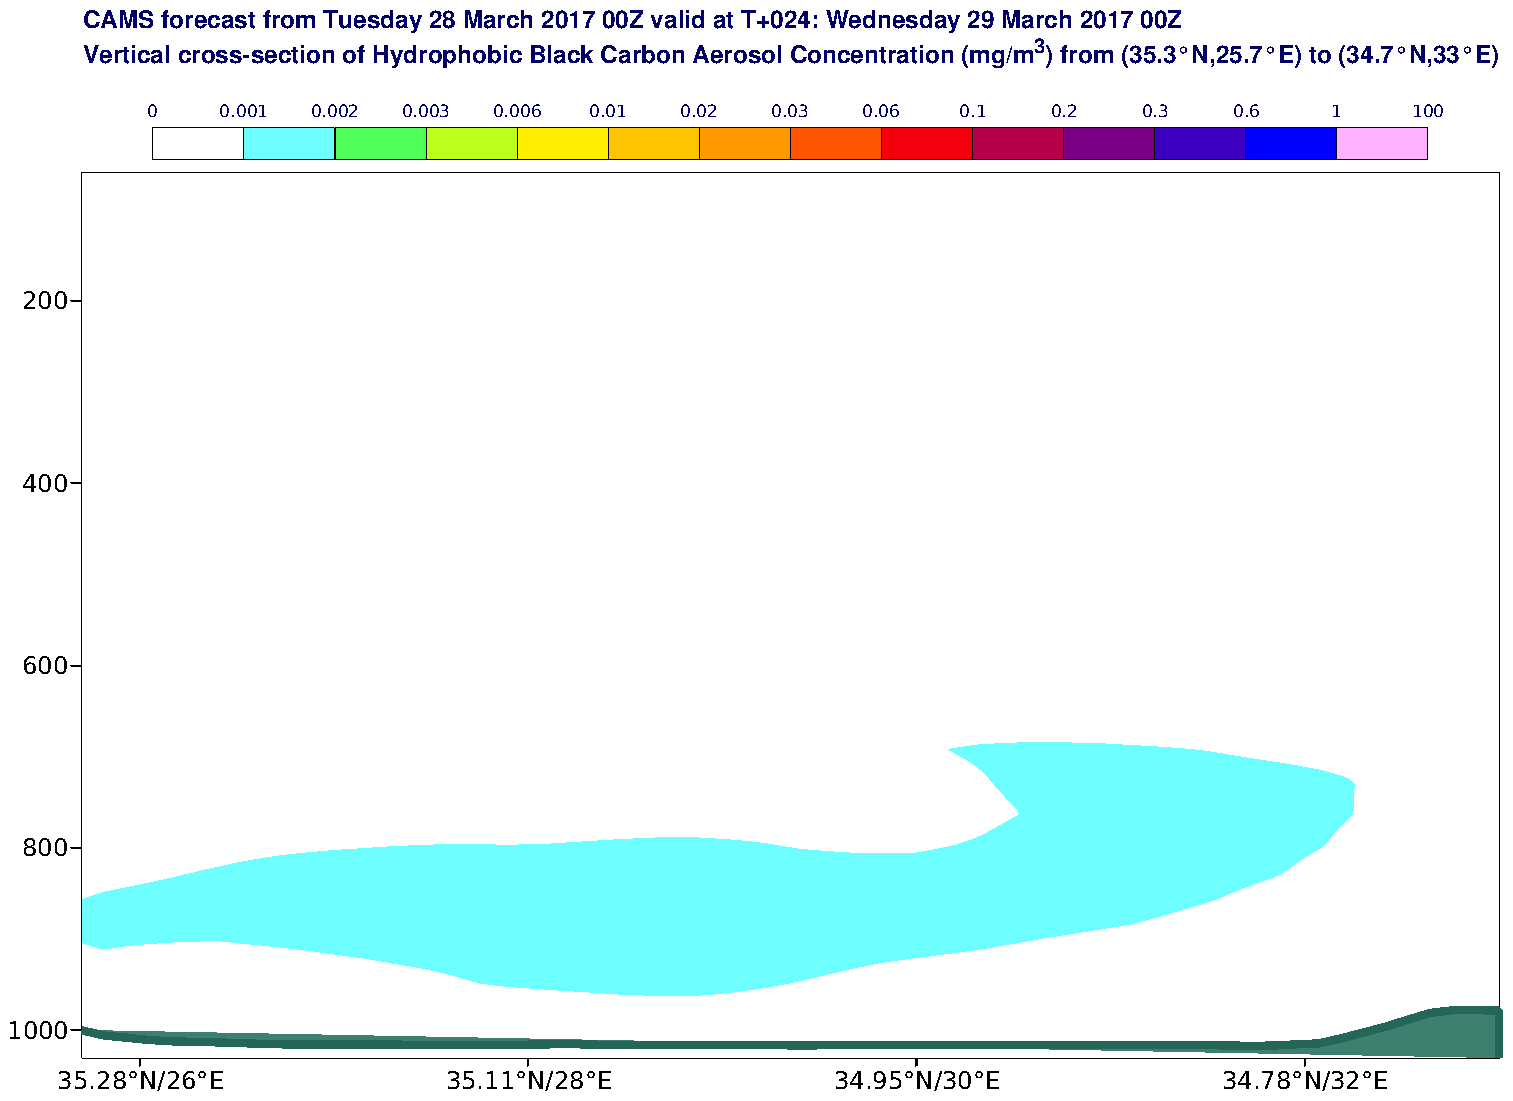 Vertical cross-section of Hydrophobic Black Carbon Aerosol Concentration (mg/m3) valid at T24 - 2017-03-29 00:00